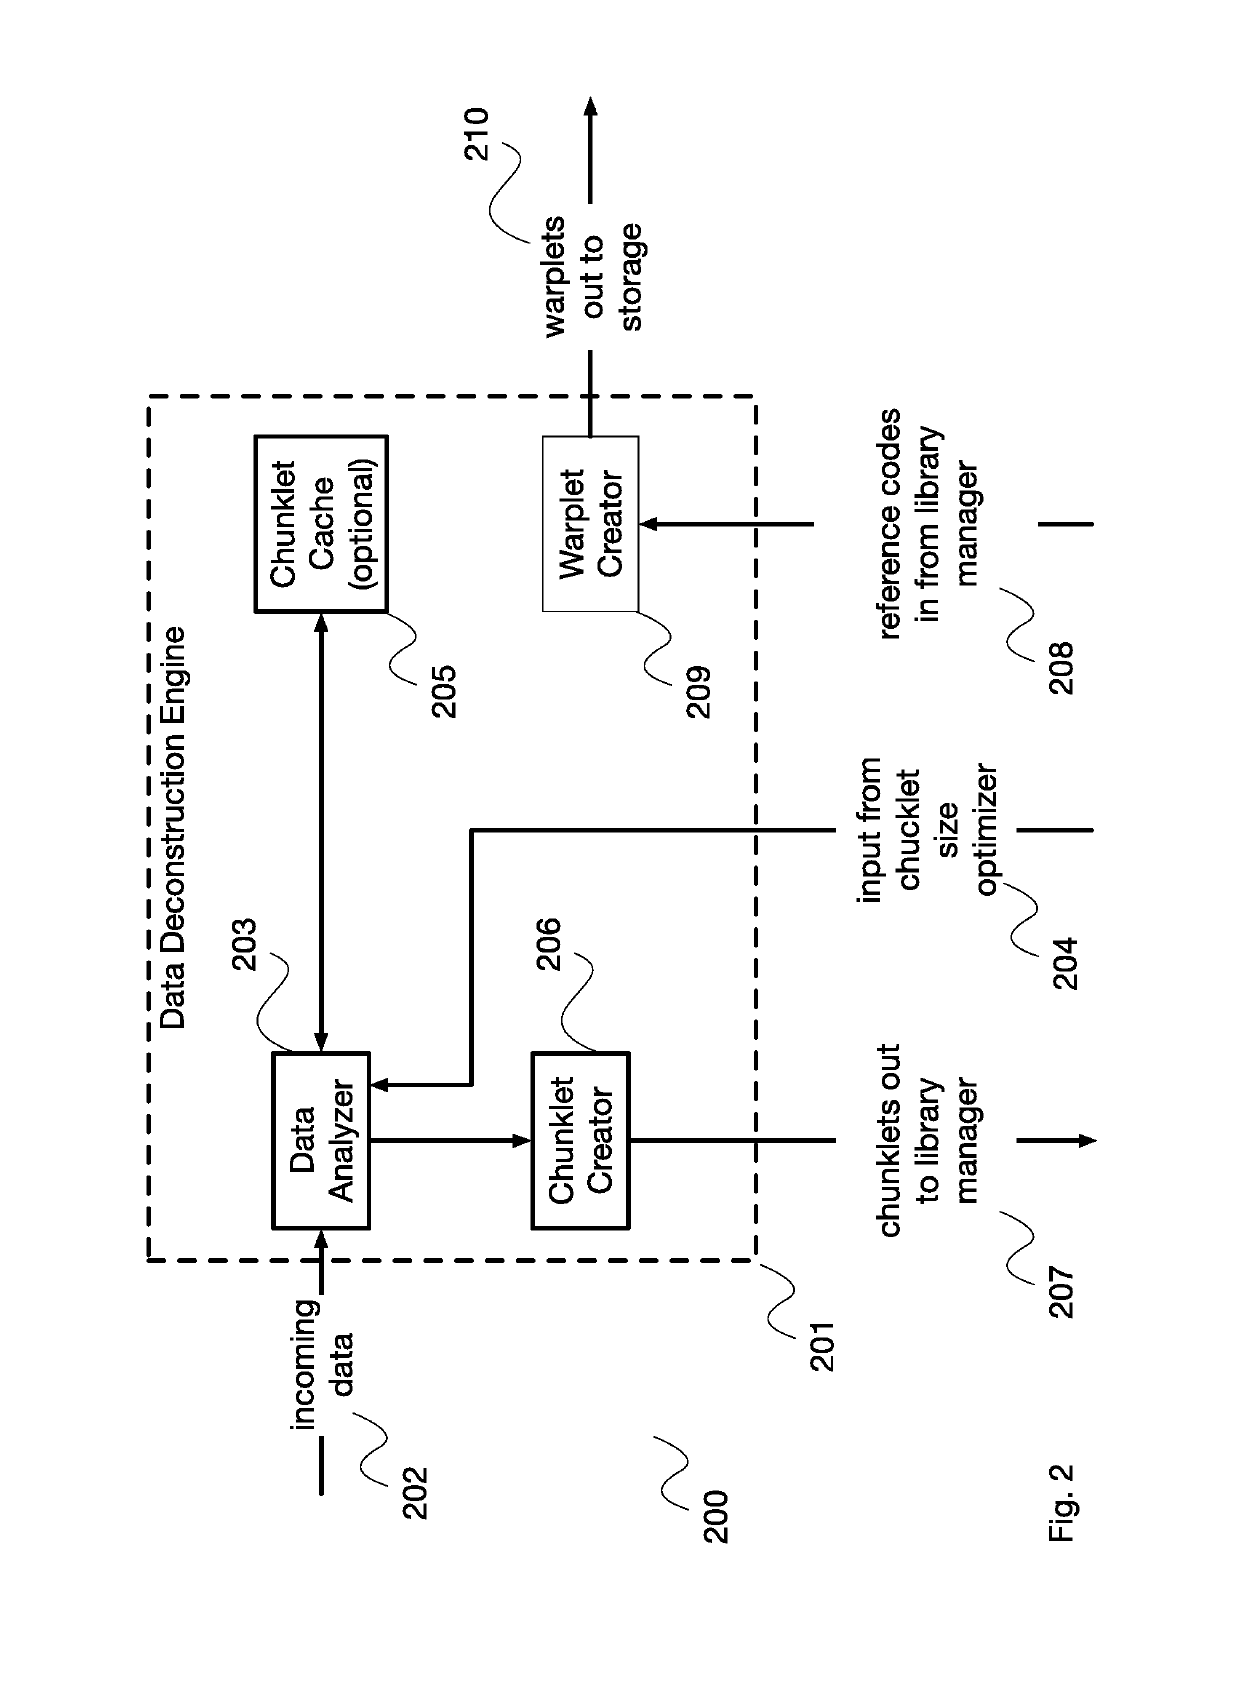 System and method for data storage, transfer, synchronization, and security